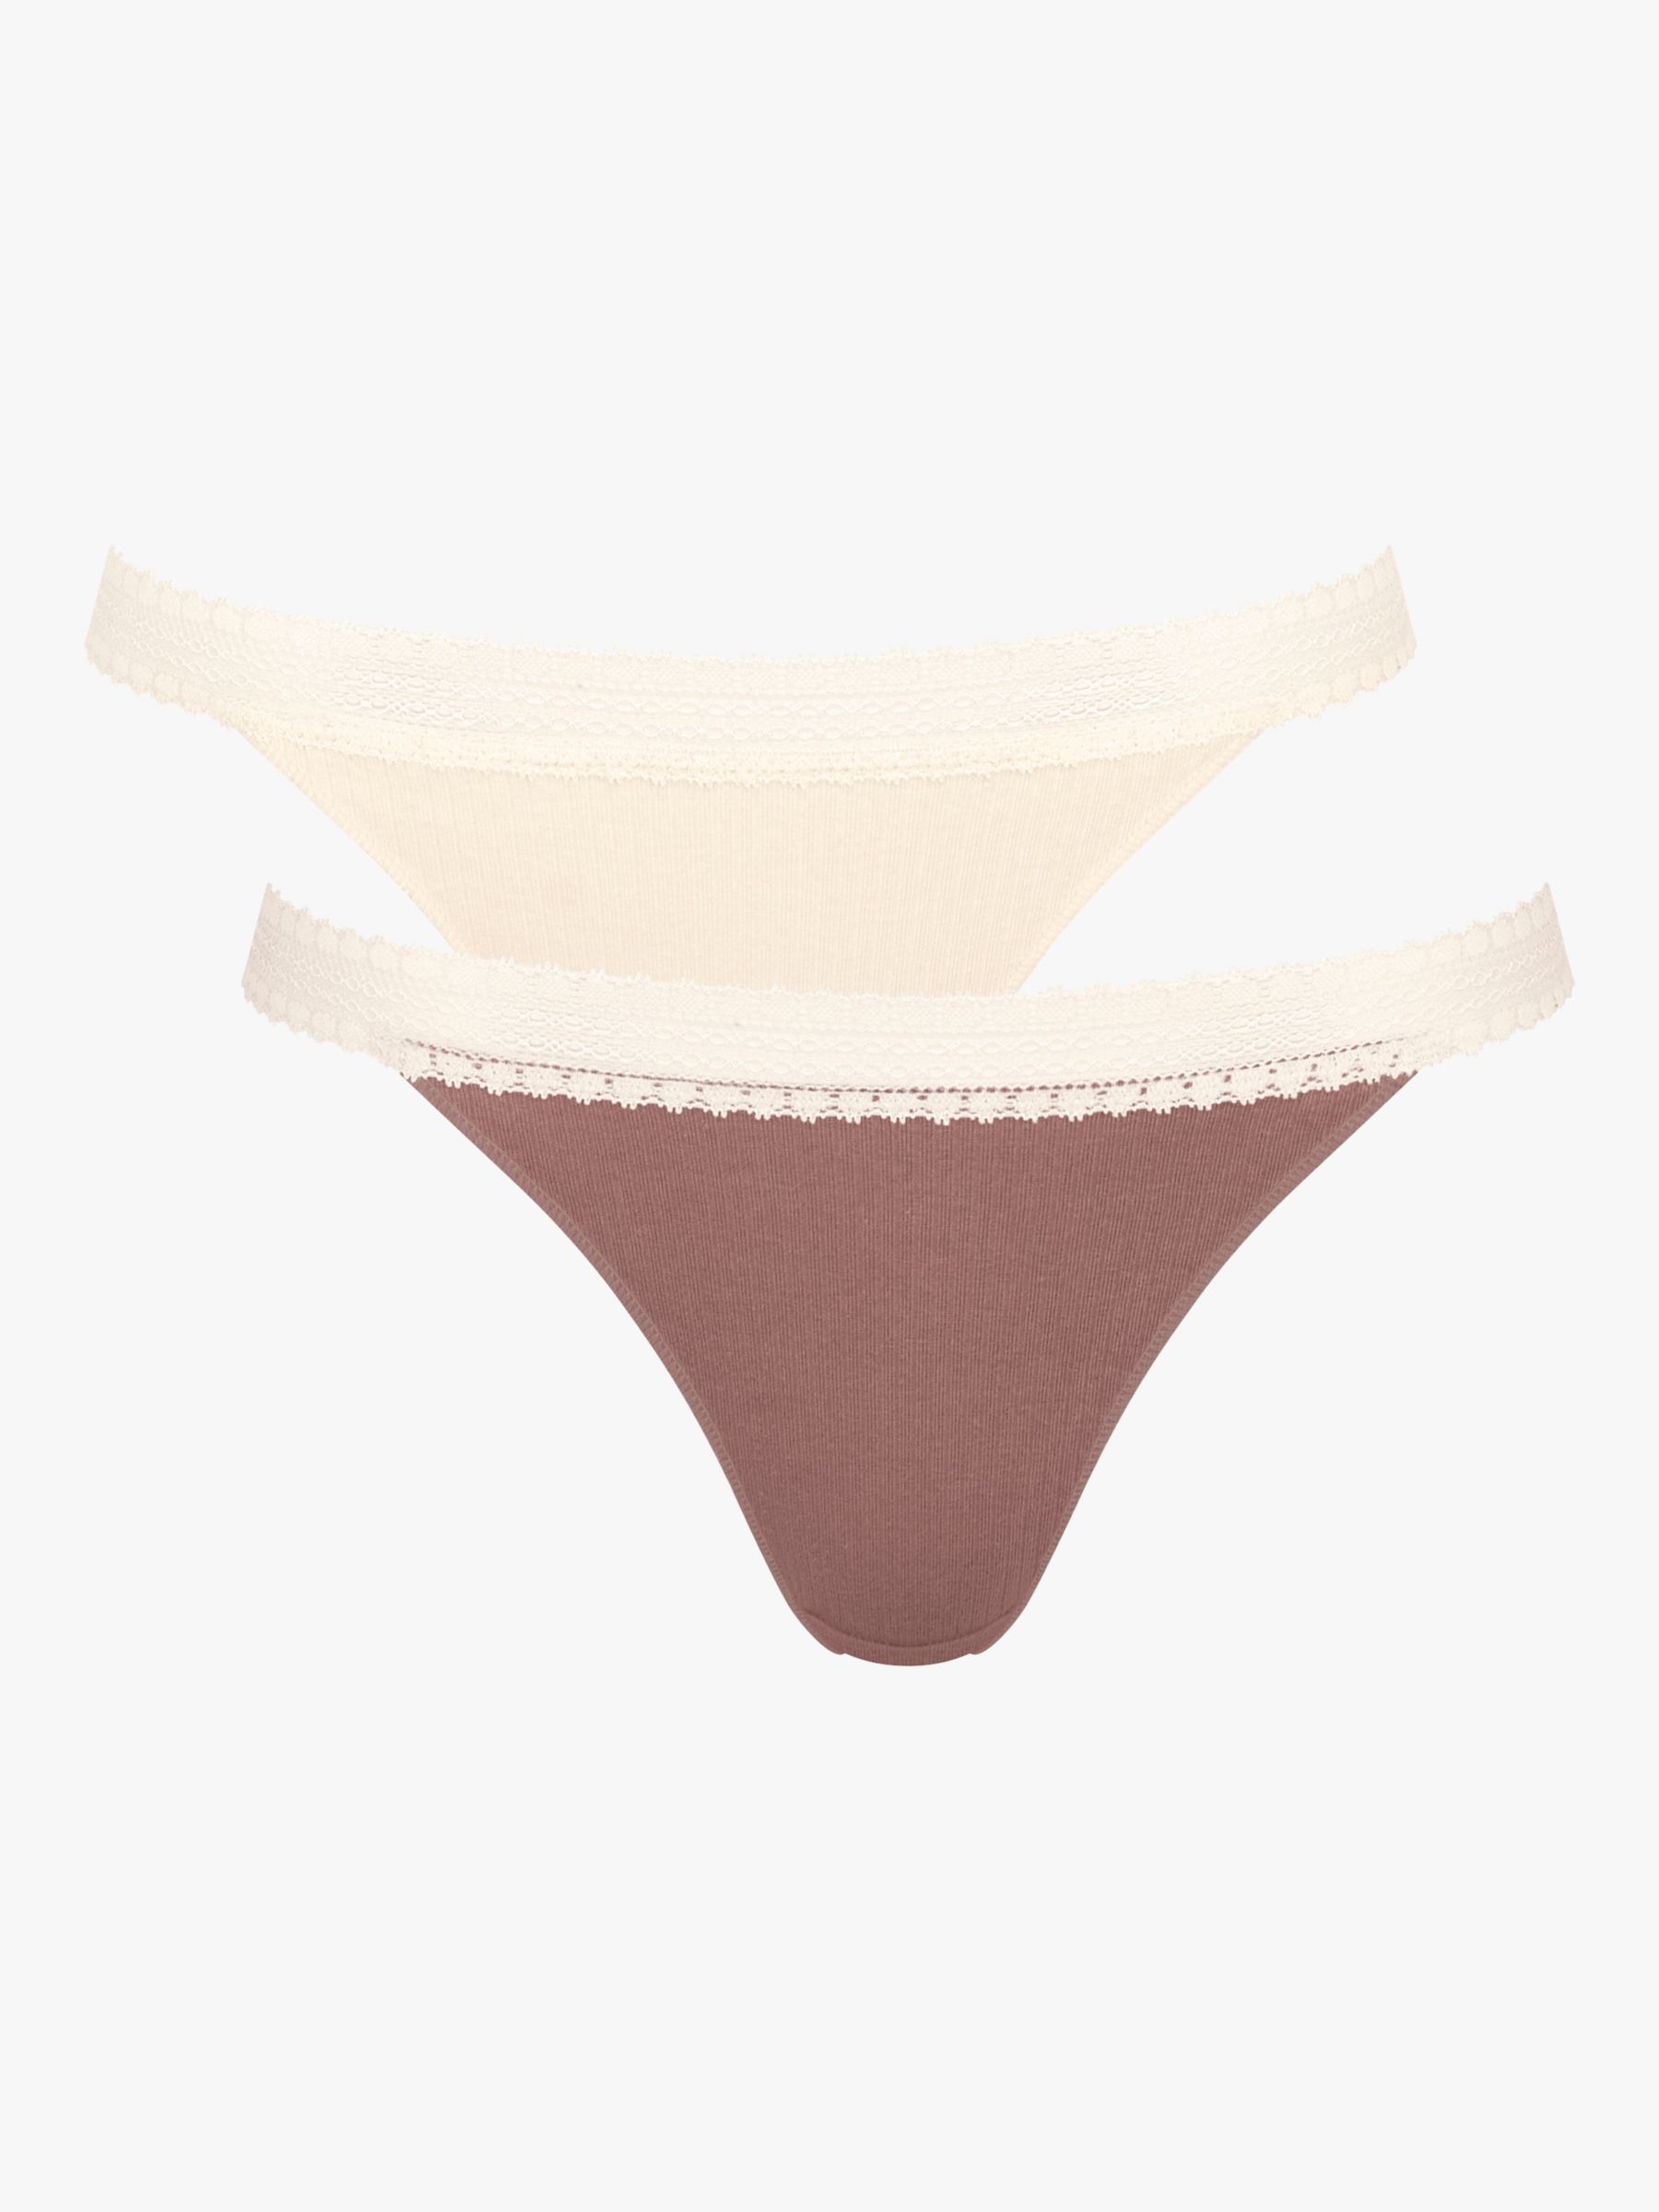 sloggi GO Ribbed Tanga Knickers, Pack of 2, Brown/Beige at John Lewis &  Partners